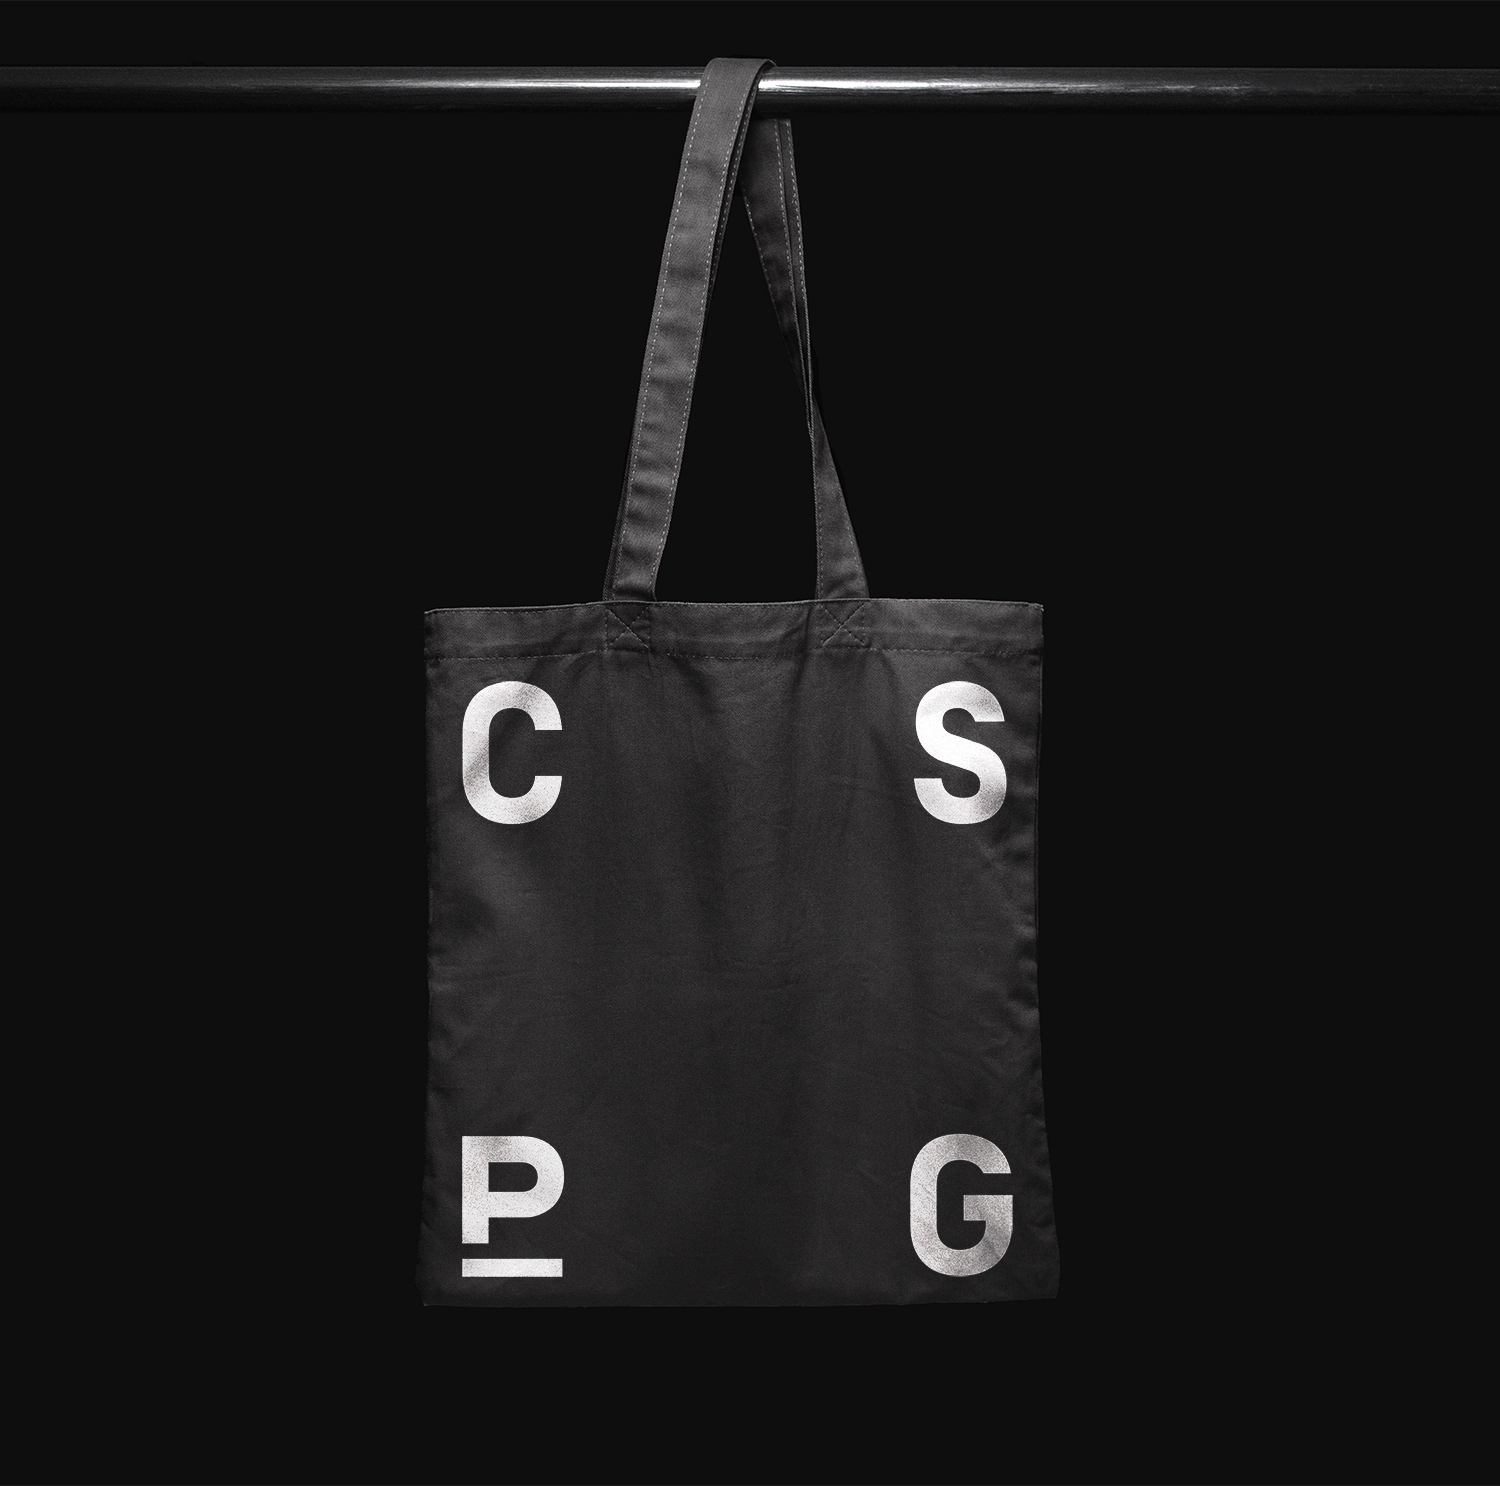 Logo and tote bag designed by Canadian studio Blok for The Center for the Study of Political Graphics